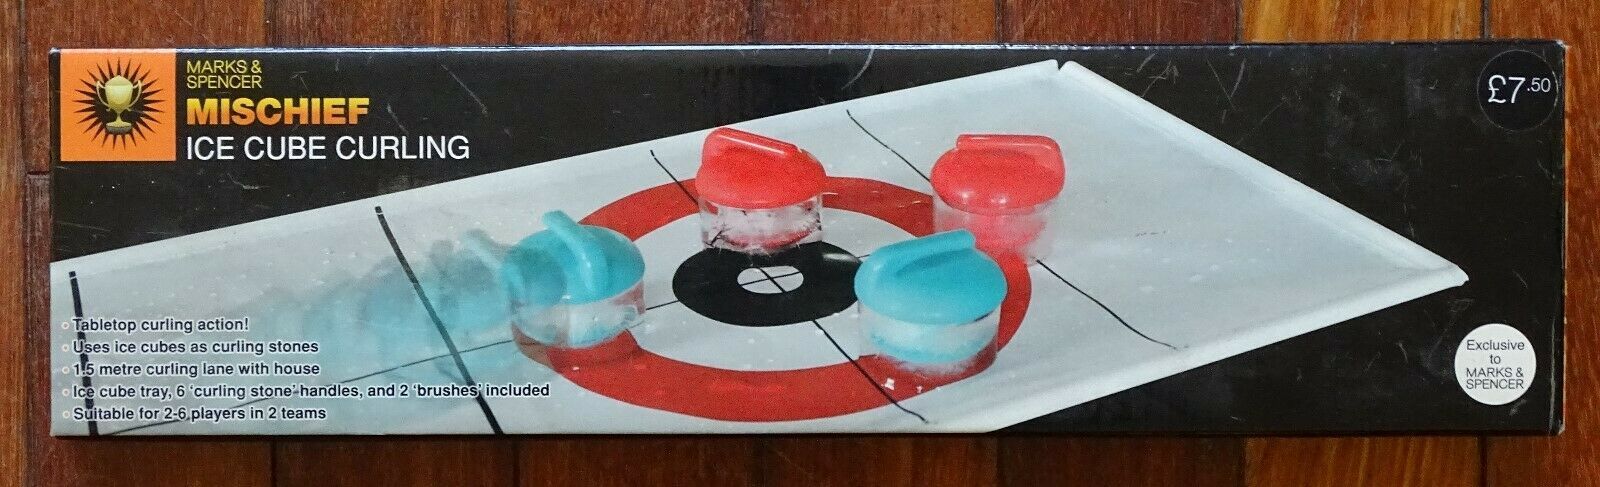 Ice Cube Curling